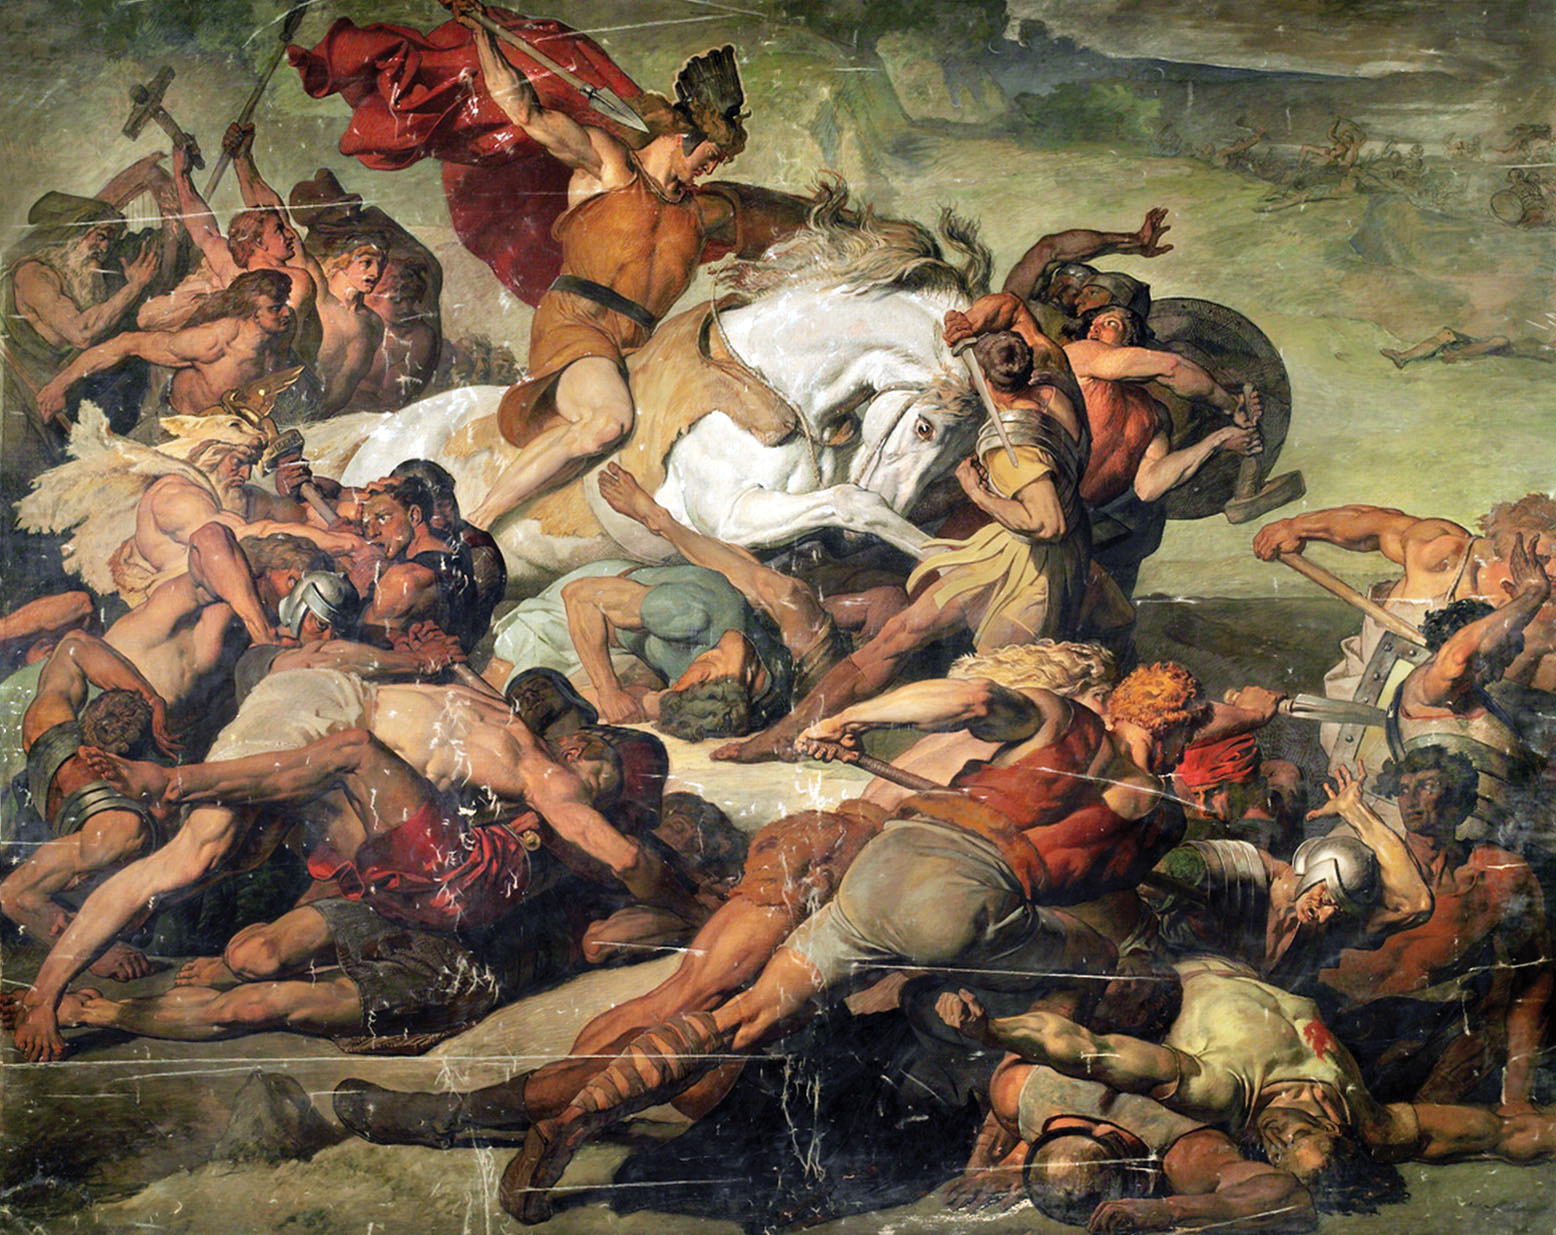 Arminius leads his tribesmen in a furious assault on the Romans in a romantic painting. The Germans conducted hit-and-run attacks on the long column until it was destroyed. 